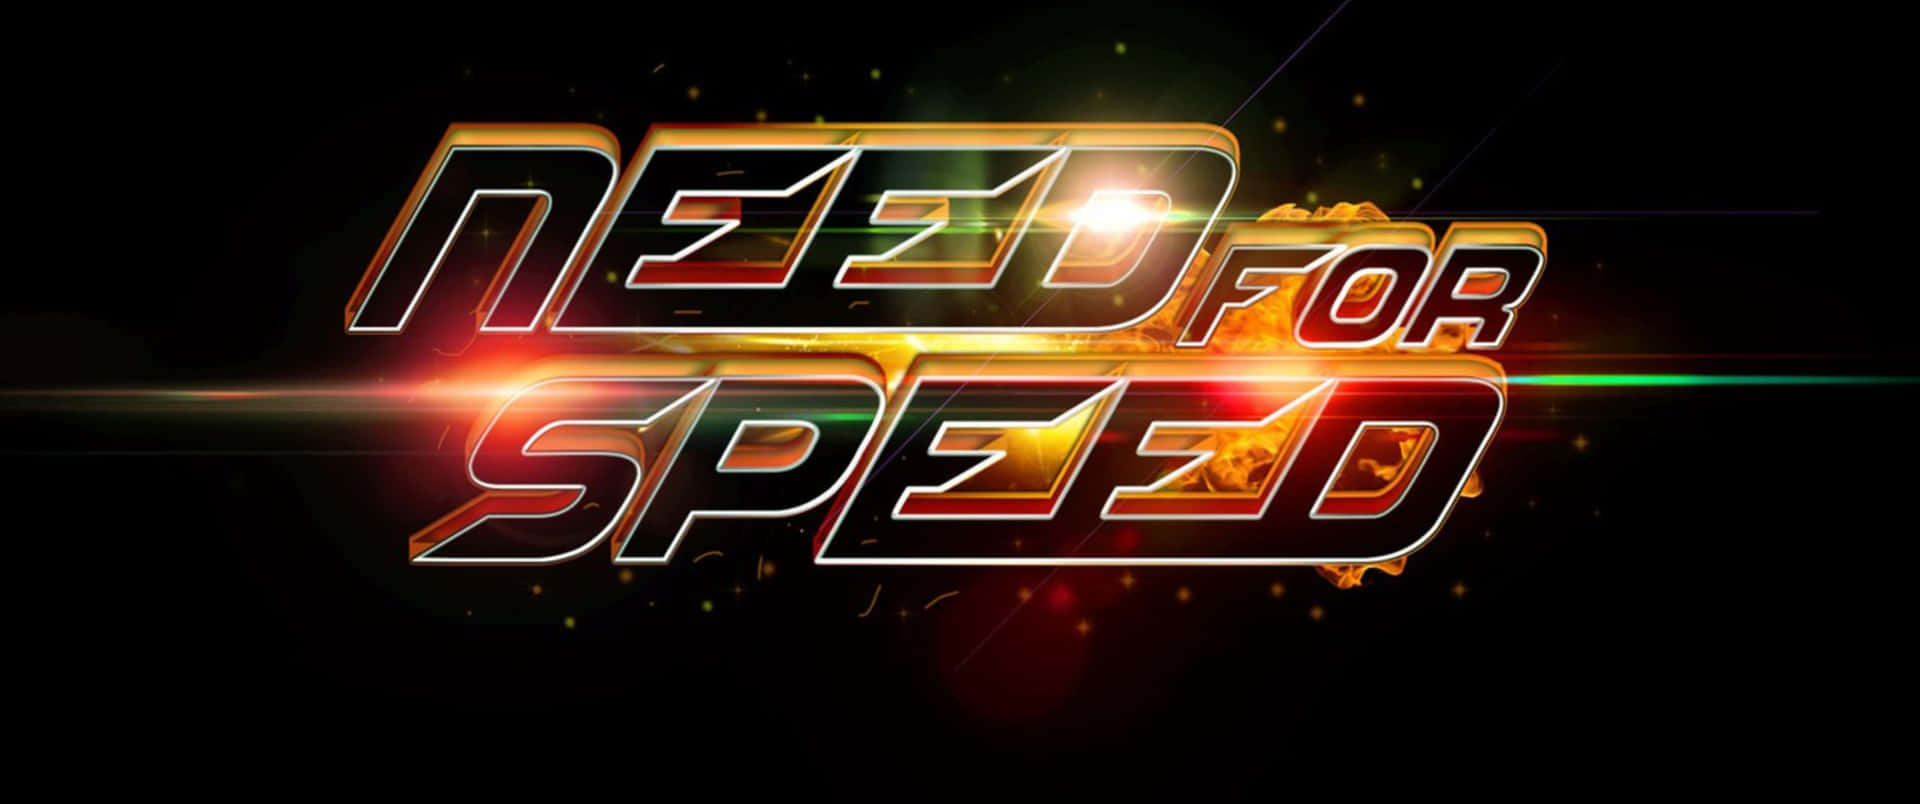 Feel the Need For Speed in This Epic 3440x1440p Wallpaper